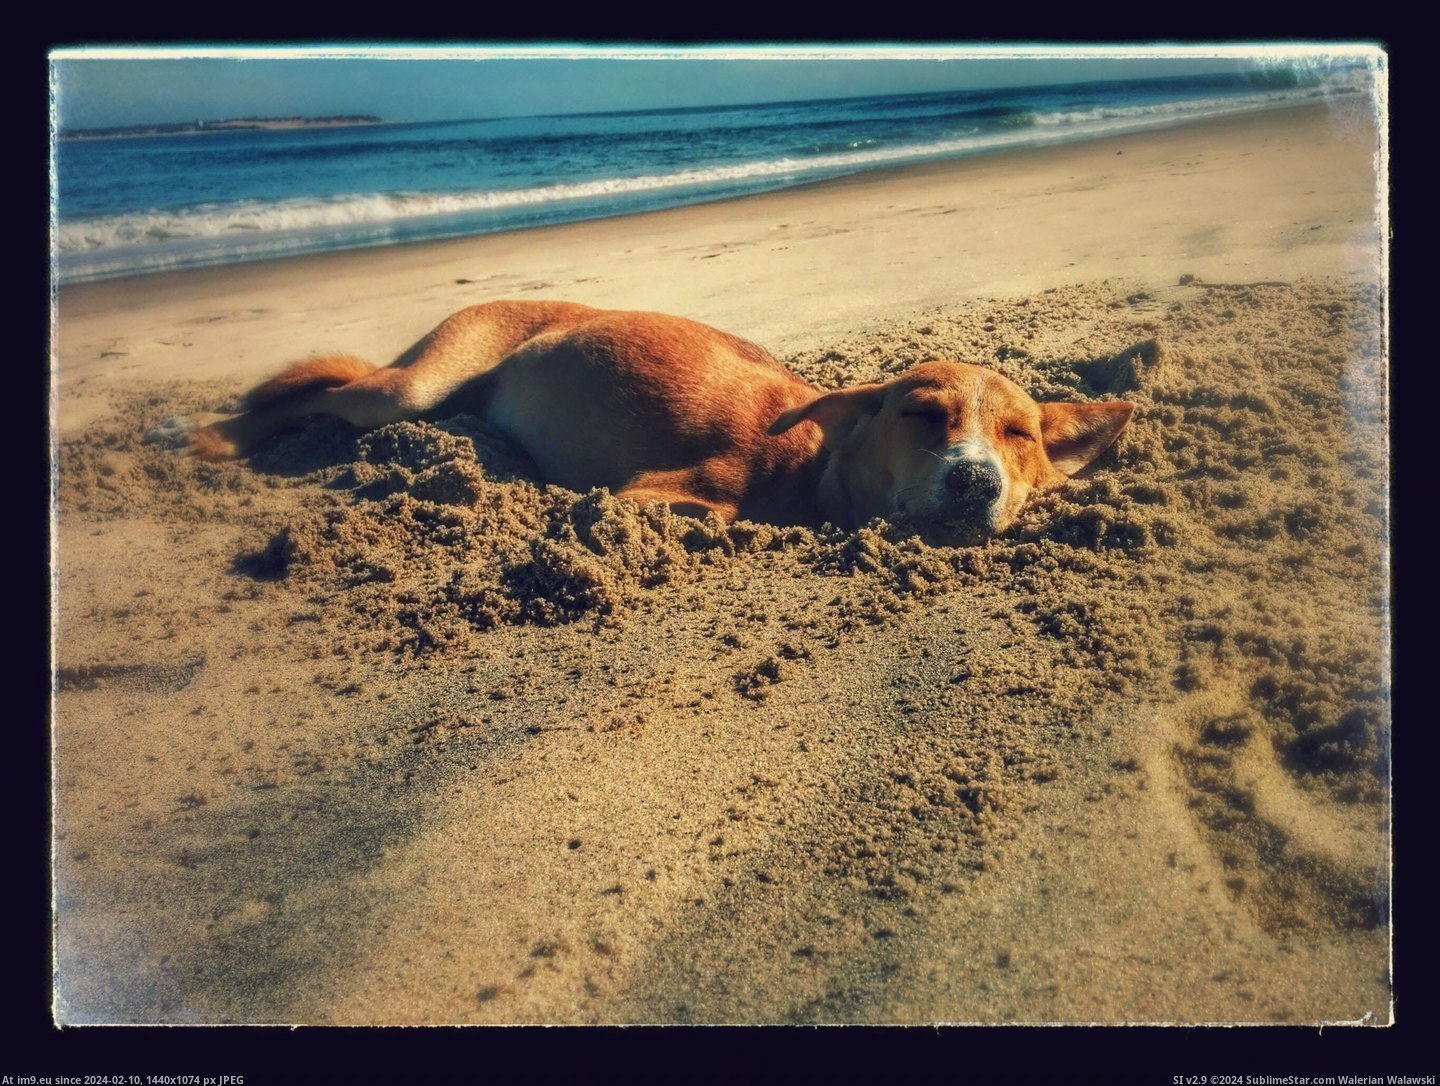 #Guy #Beach #Hole #Lanka #Sri #Dug #Sitting #Sleep #Visited [Aww] I visited Sri-Lanka recently, while sitting on the beach this guy came and dug a hole next to us, got in and went to sleep Pic. (Image of album My r/AWW favs))